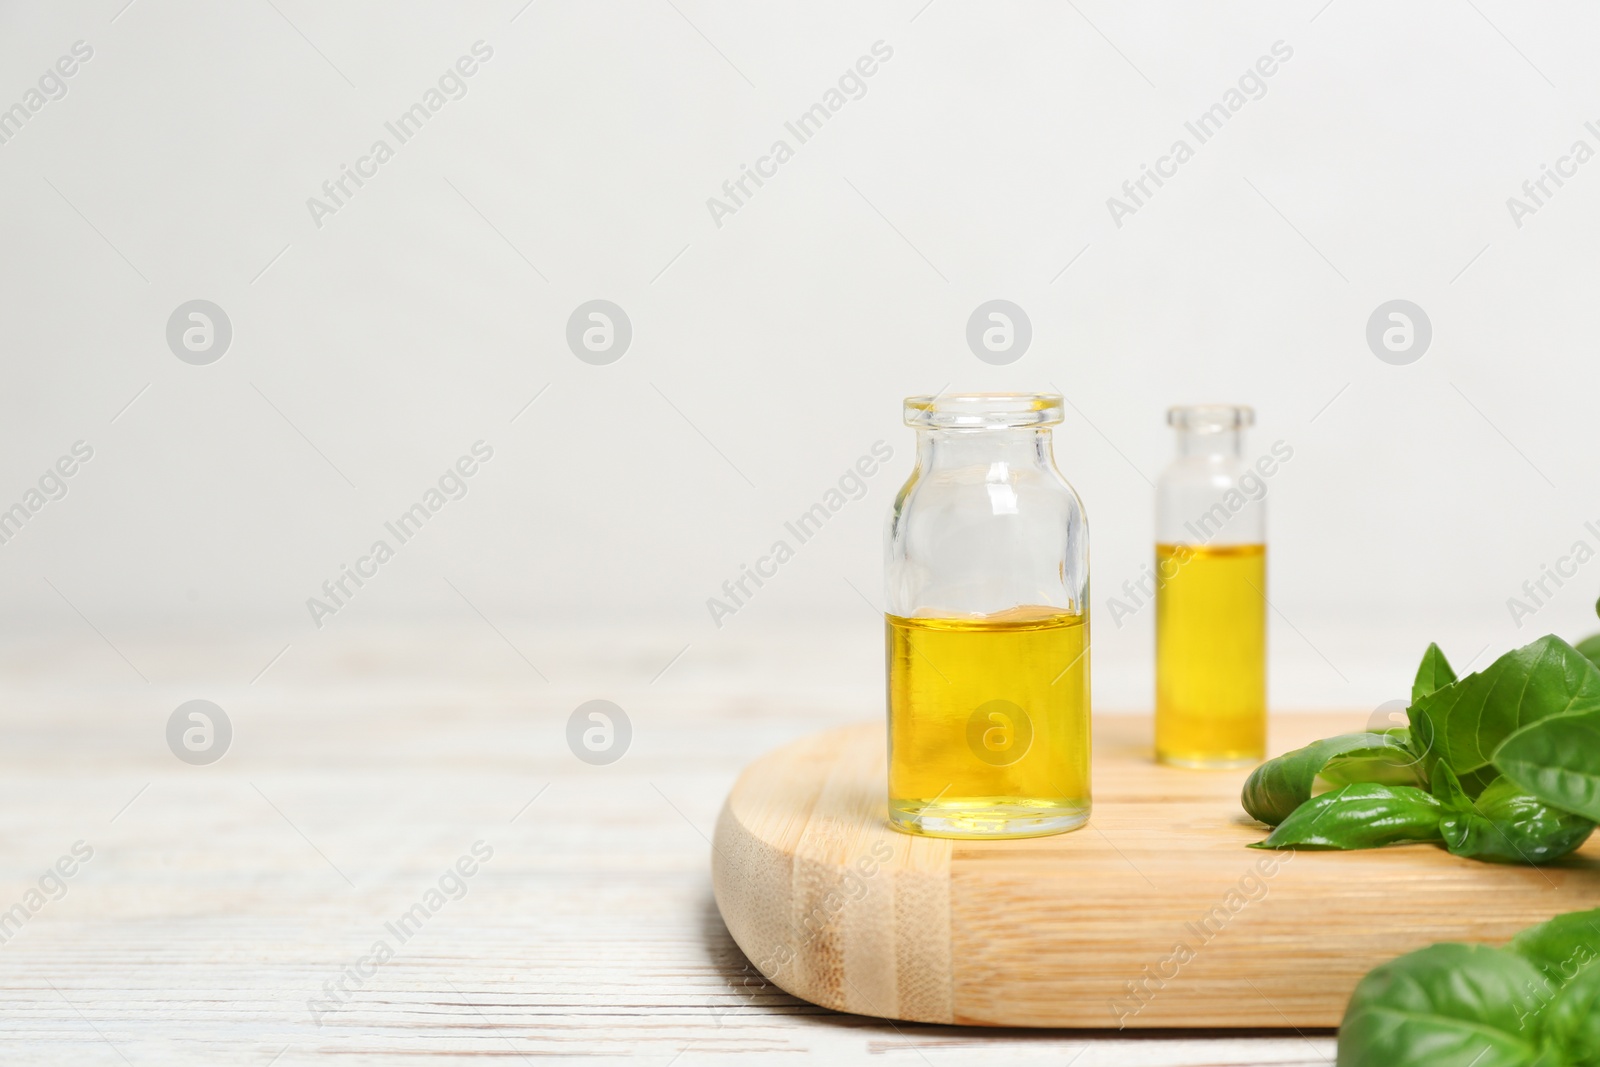 Photo of Wooden board with glass bottles of basil oil, leaves and space for text